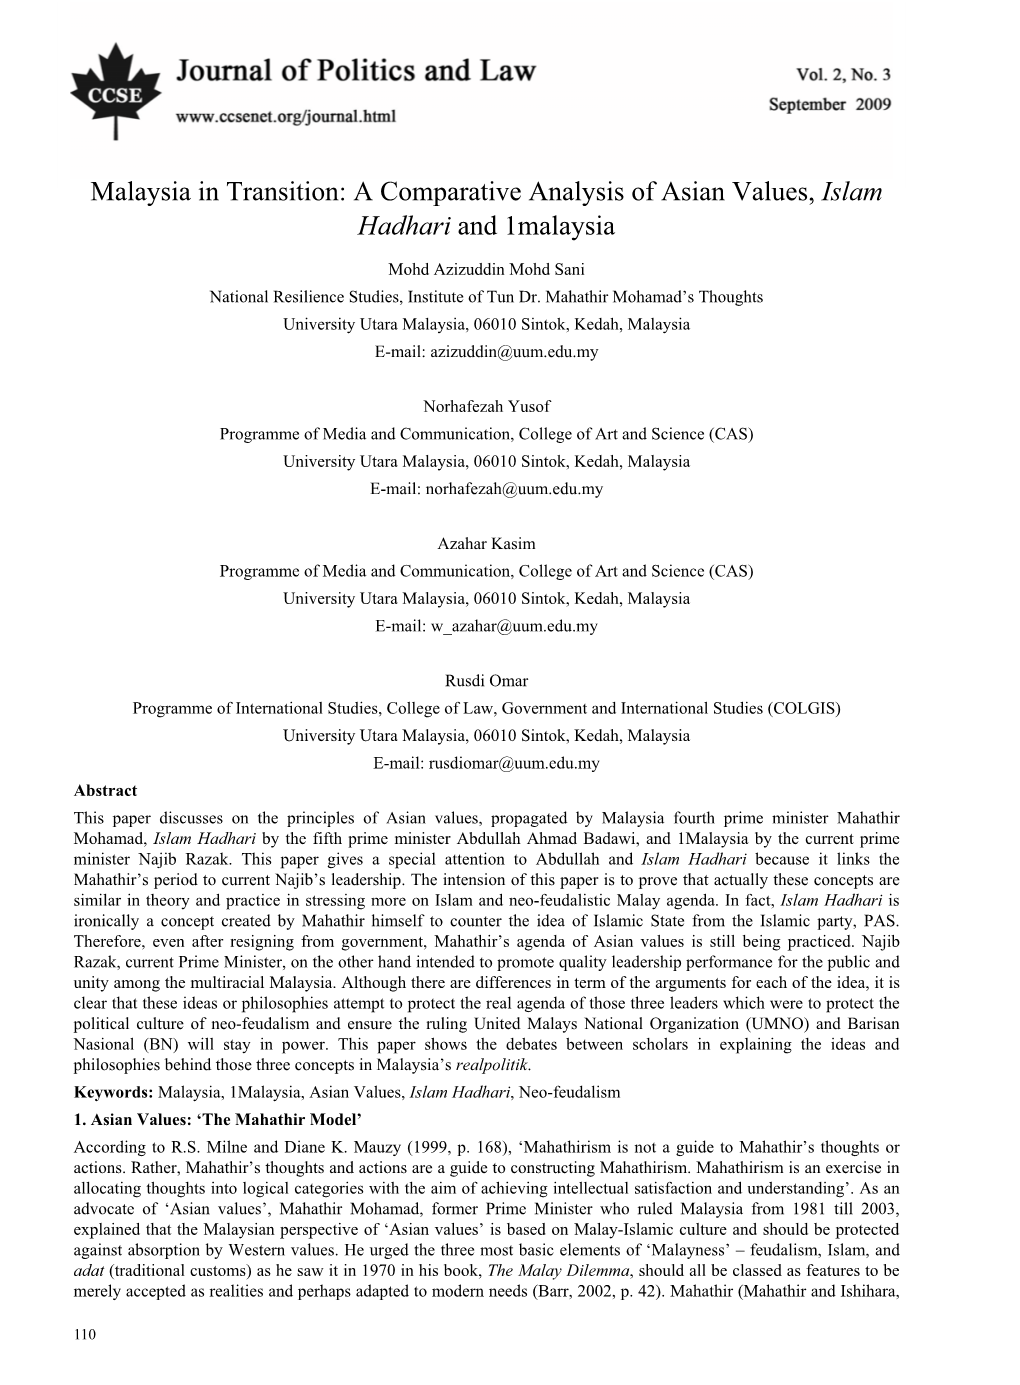 Malaysia in Transition: a Comparative Analysis of Asian Values, Islam Hadhari and 1Malaysia